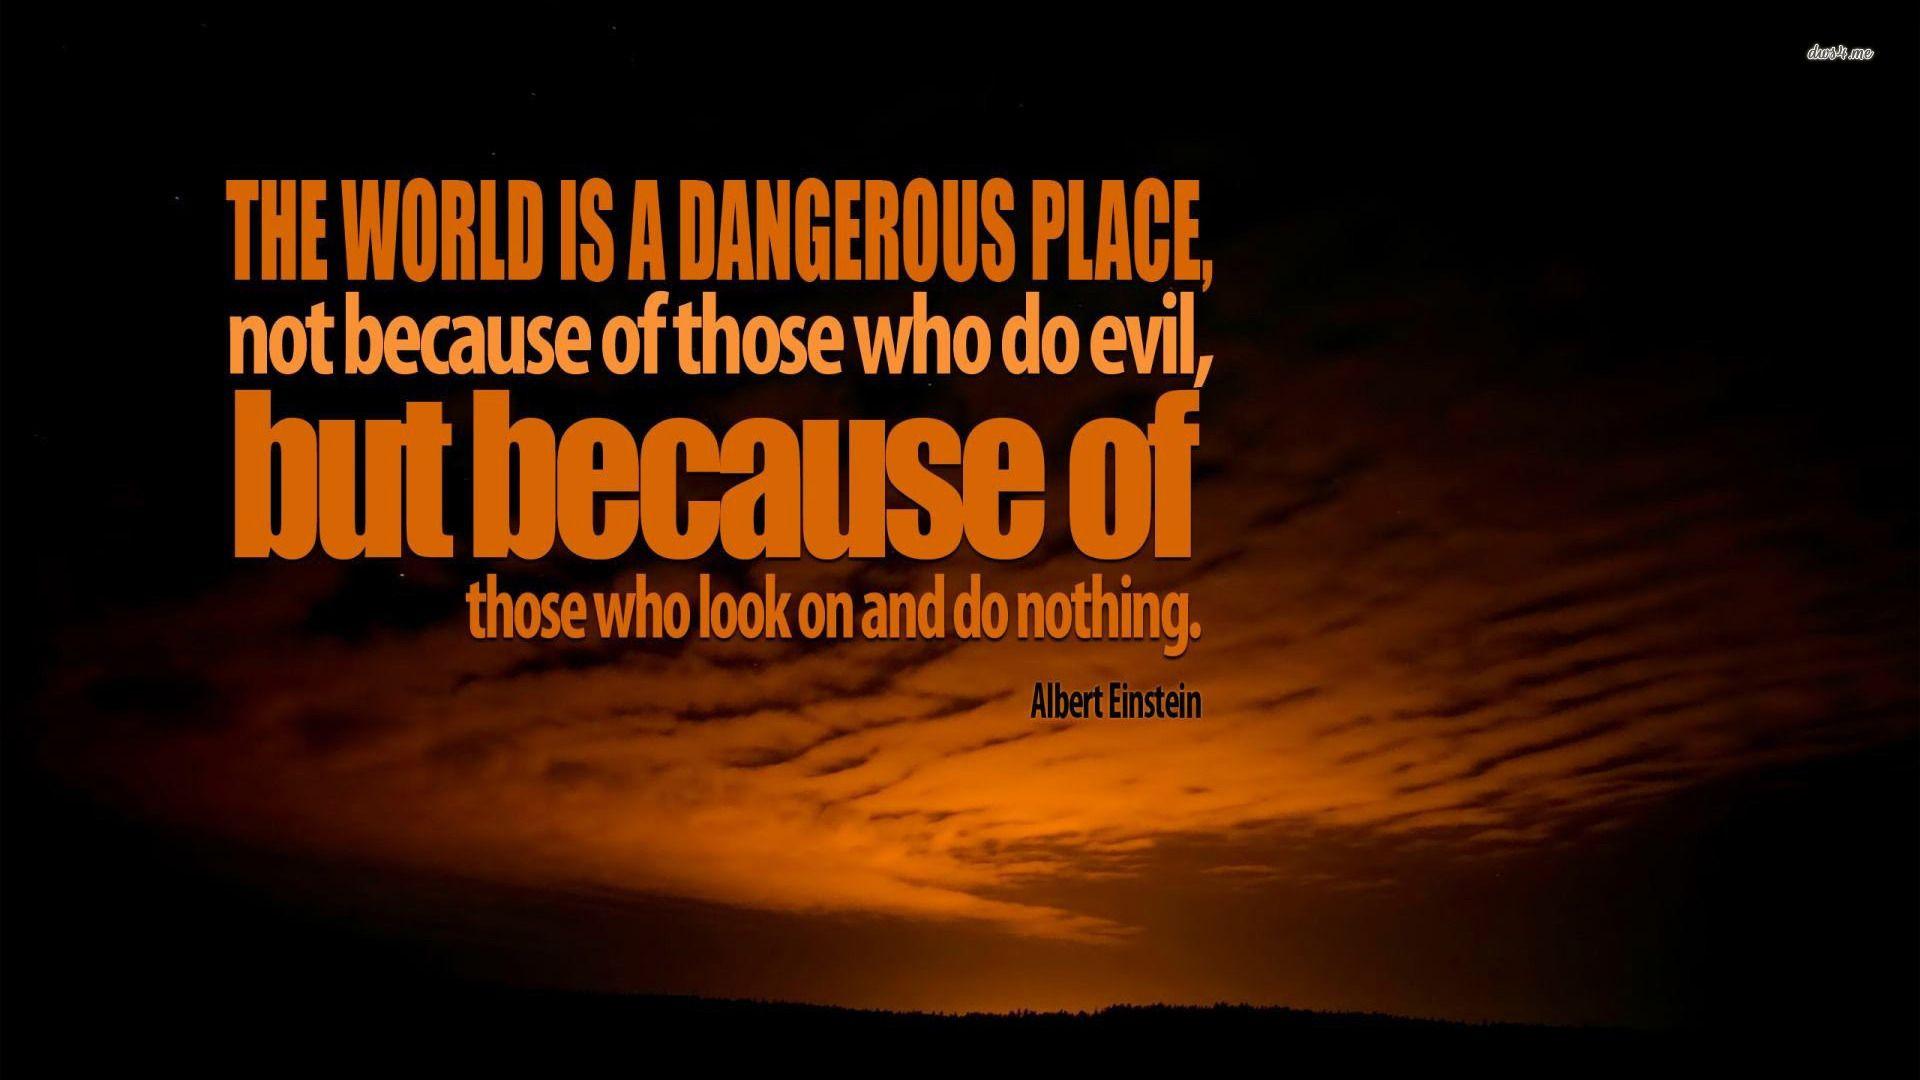 Running Quotes Wallpaper 5074d1389492438 Share Your Wallpaper 22538 Albert Einstein About Evil 1920x1080 Quote